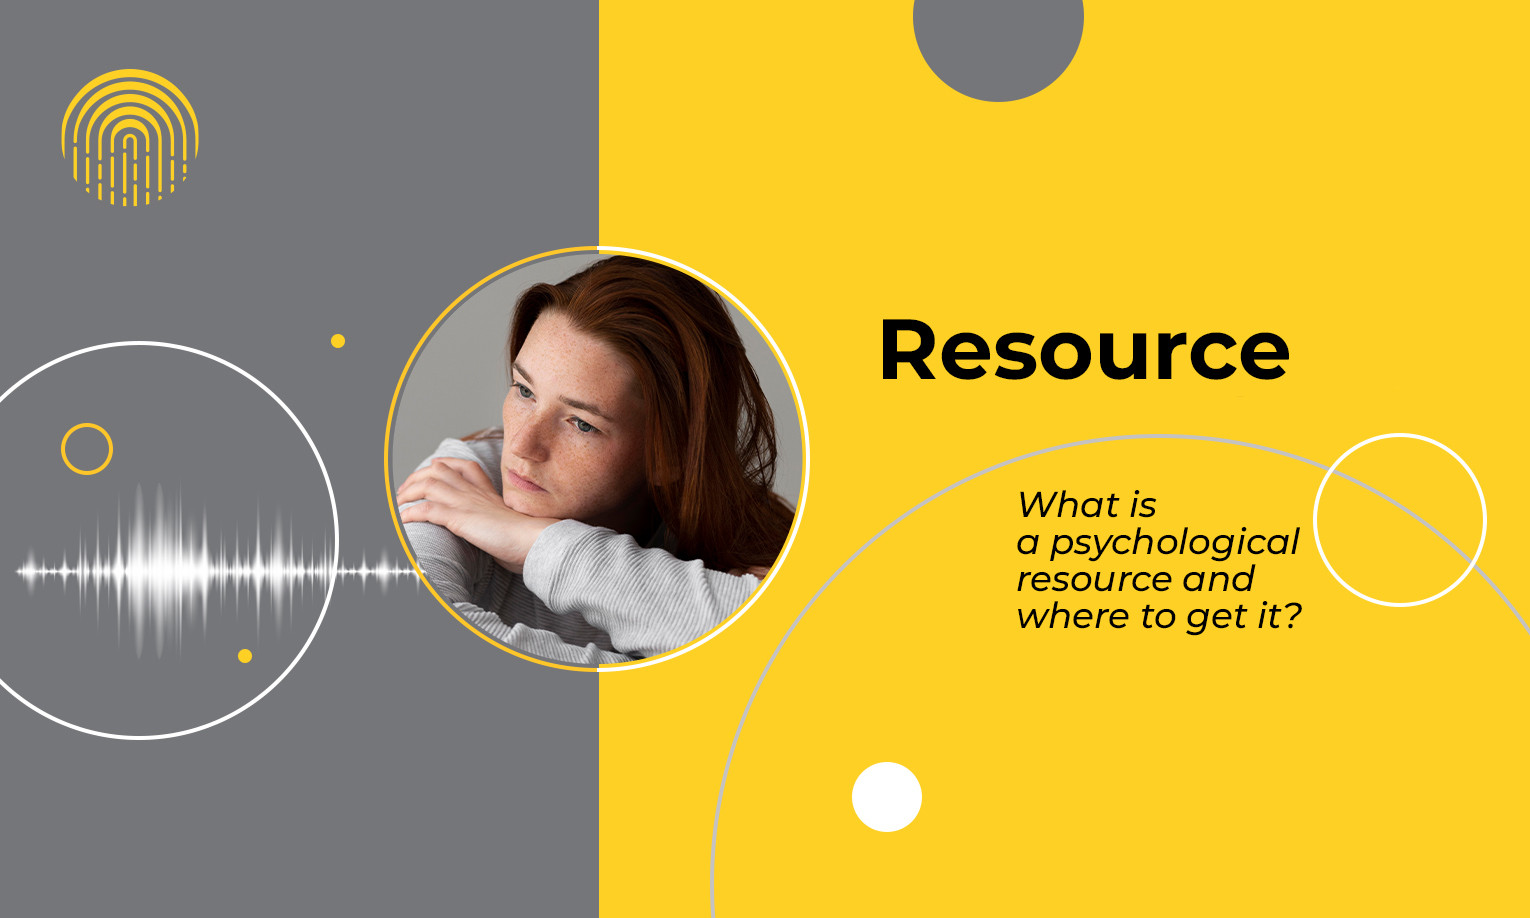 What is a psychological resource and where can we get it?